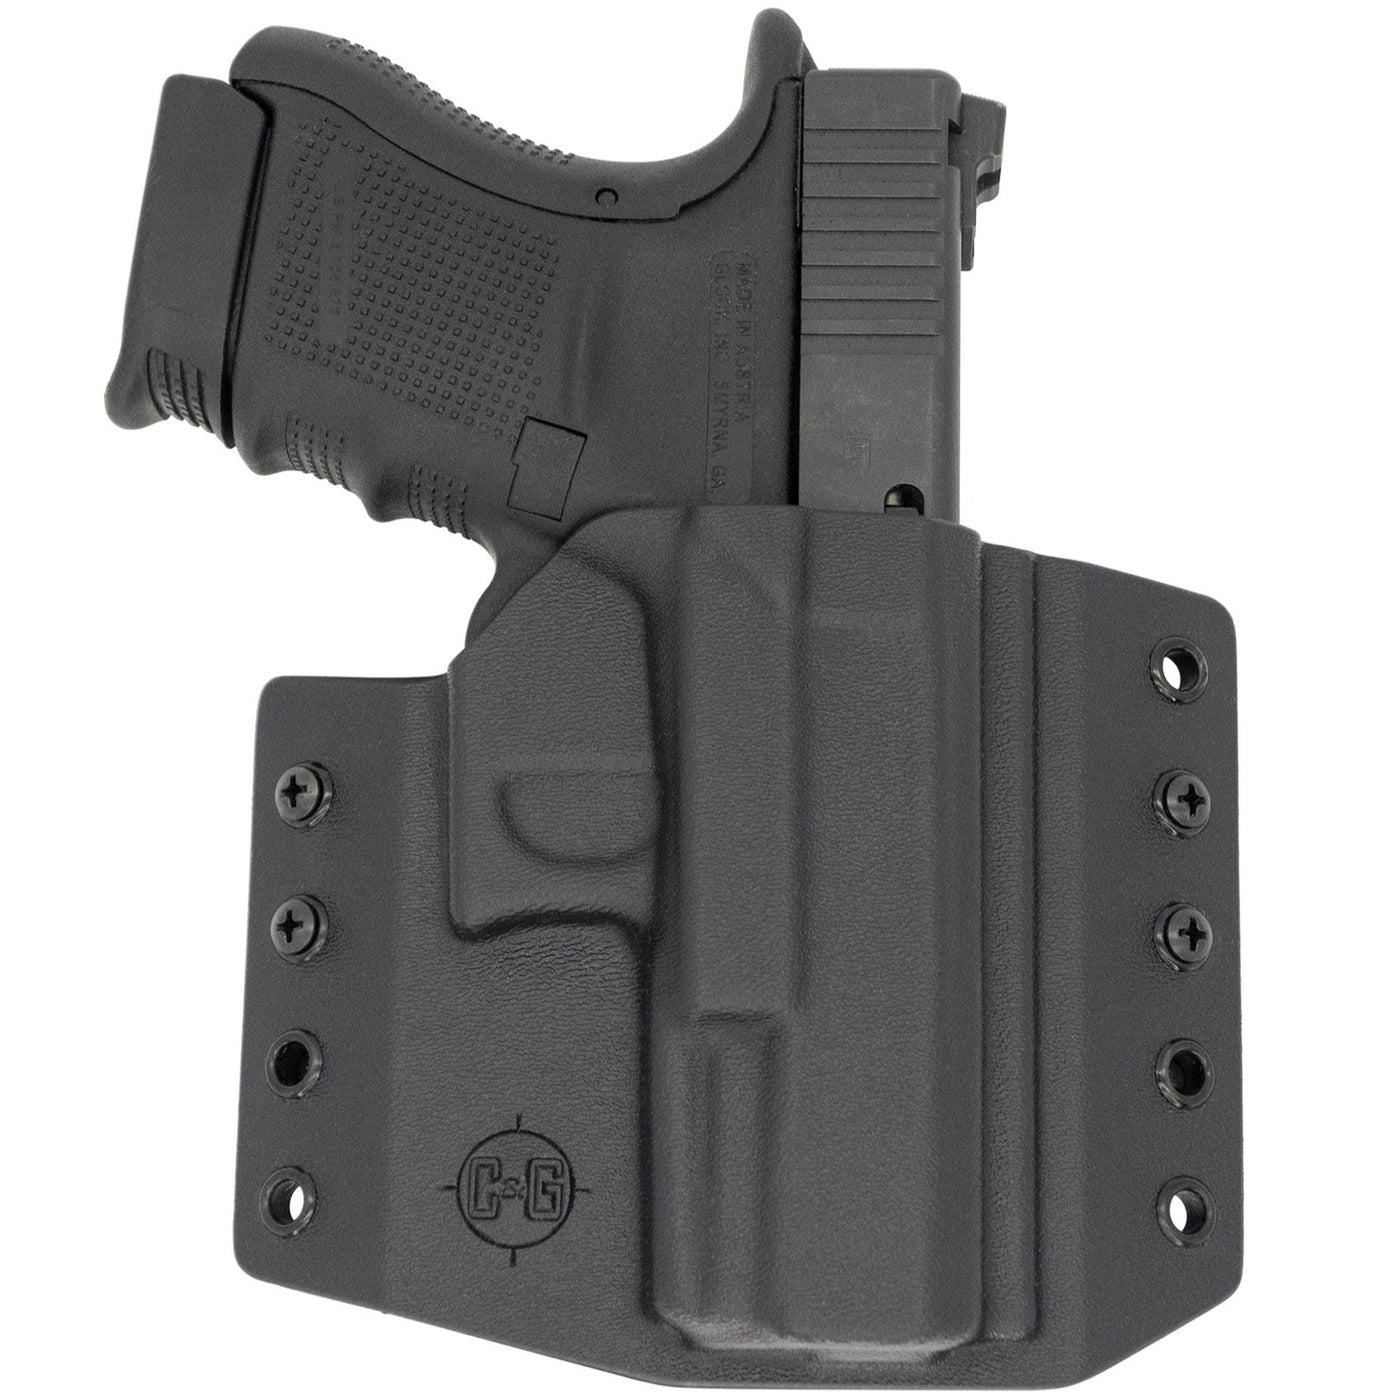 This is the custom C&G Holsters outside the waistband holster for a Glock 30sf.